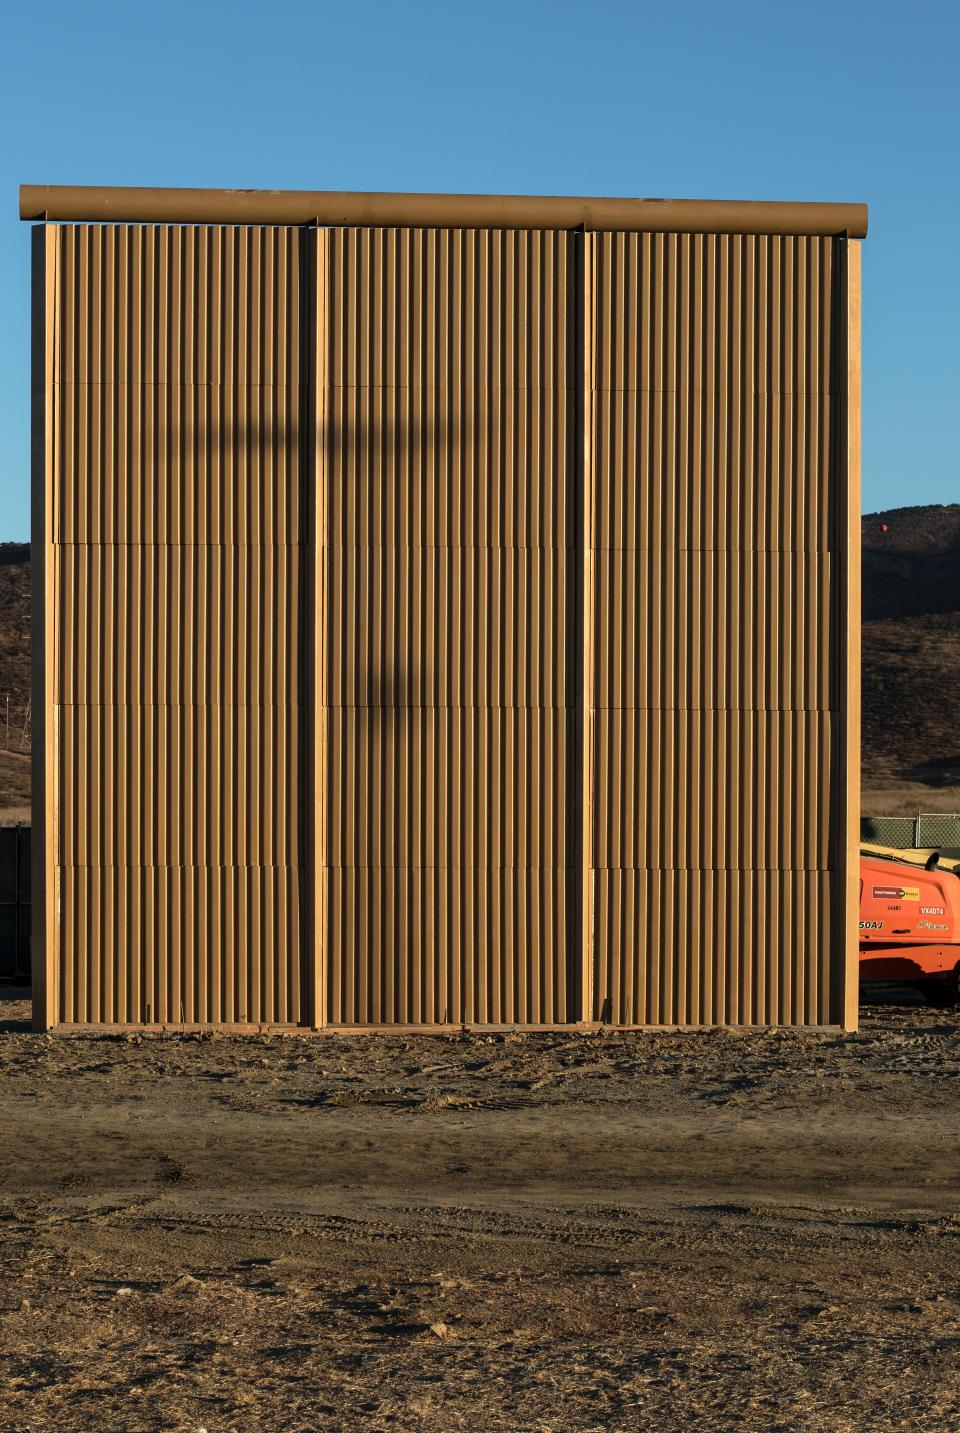 The walls are up to 30ft high (Picture: Getty)